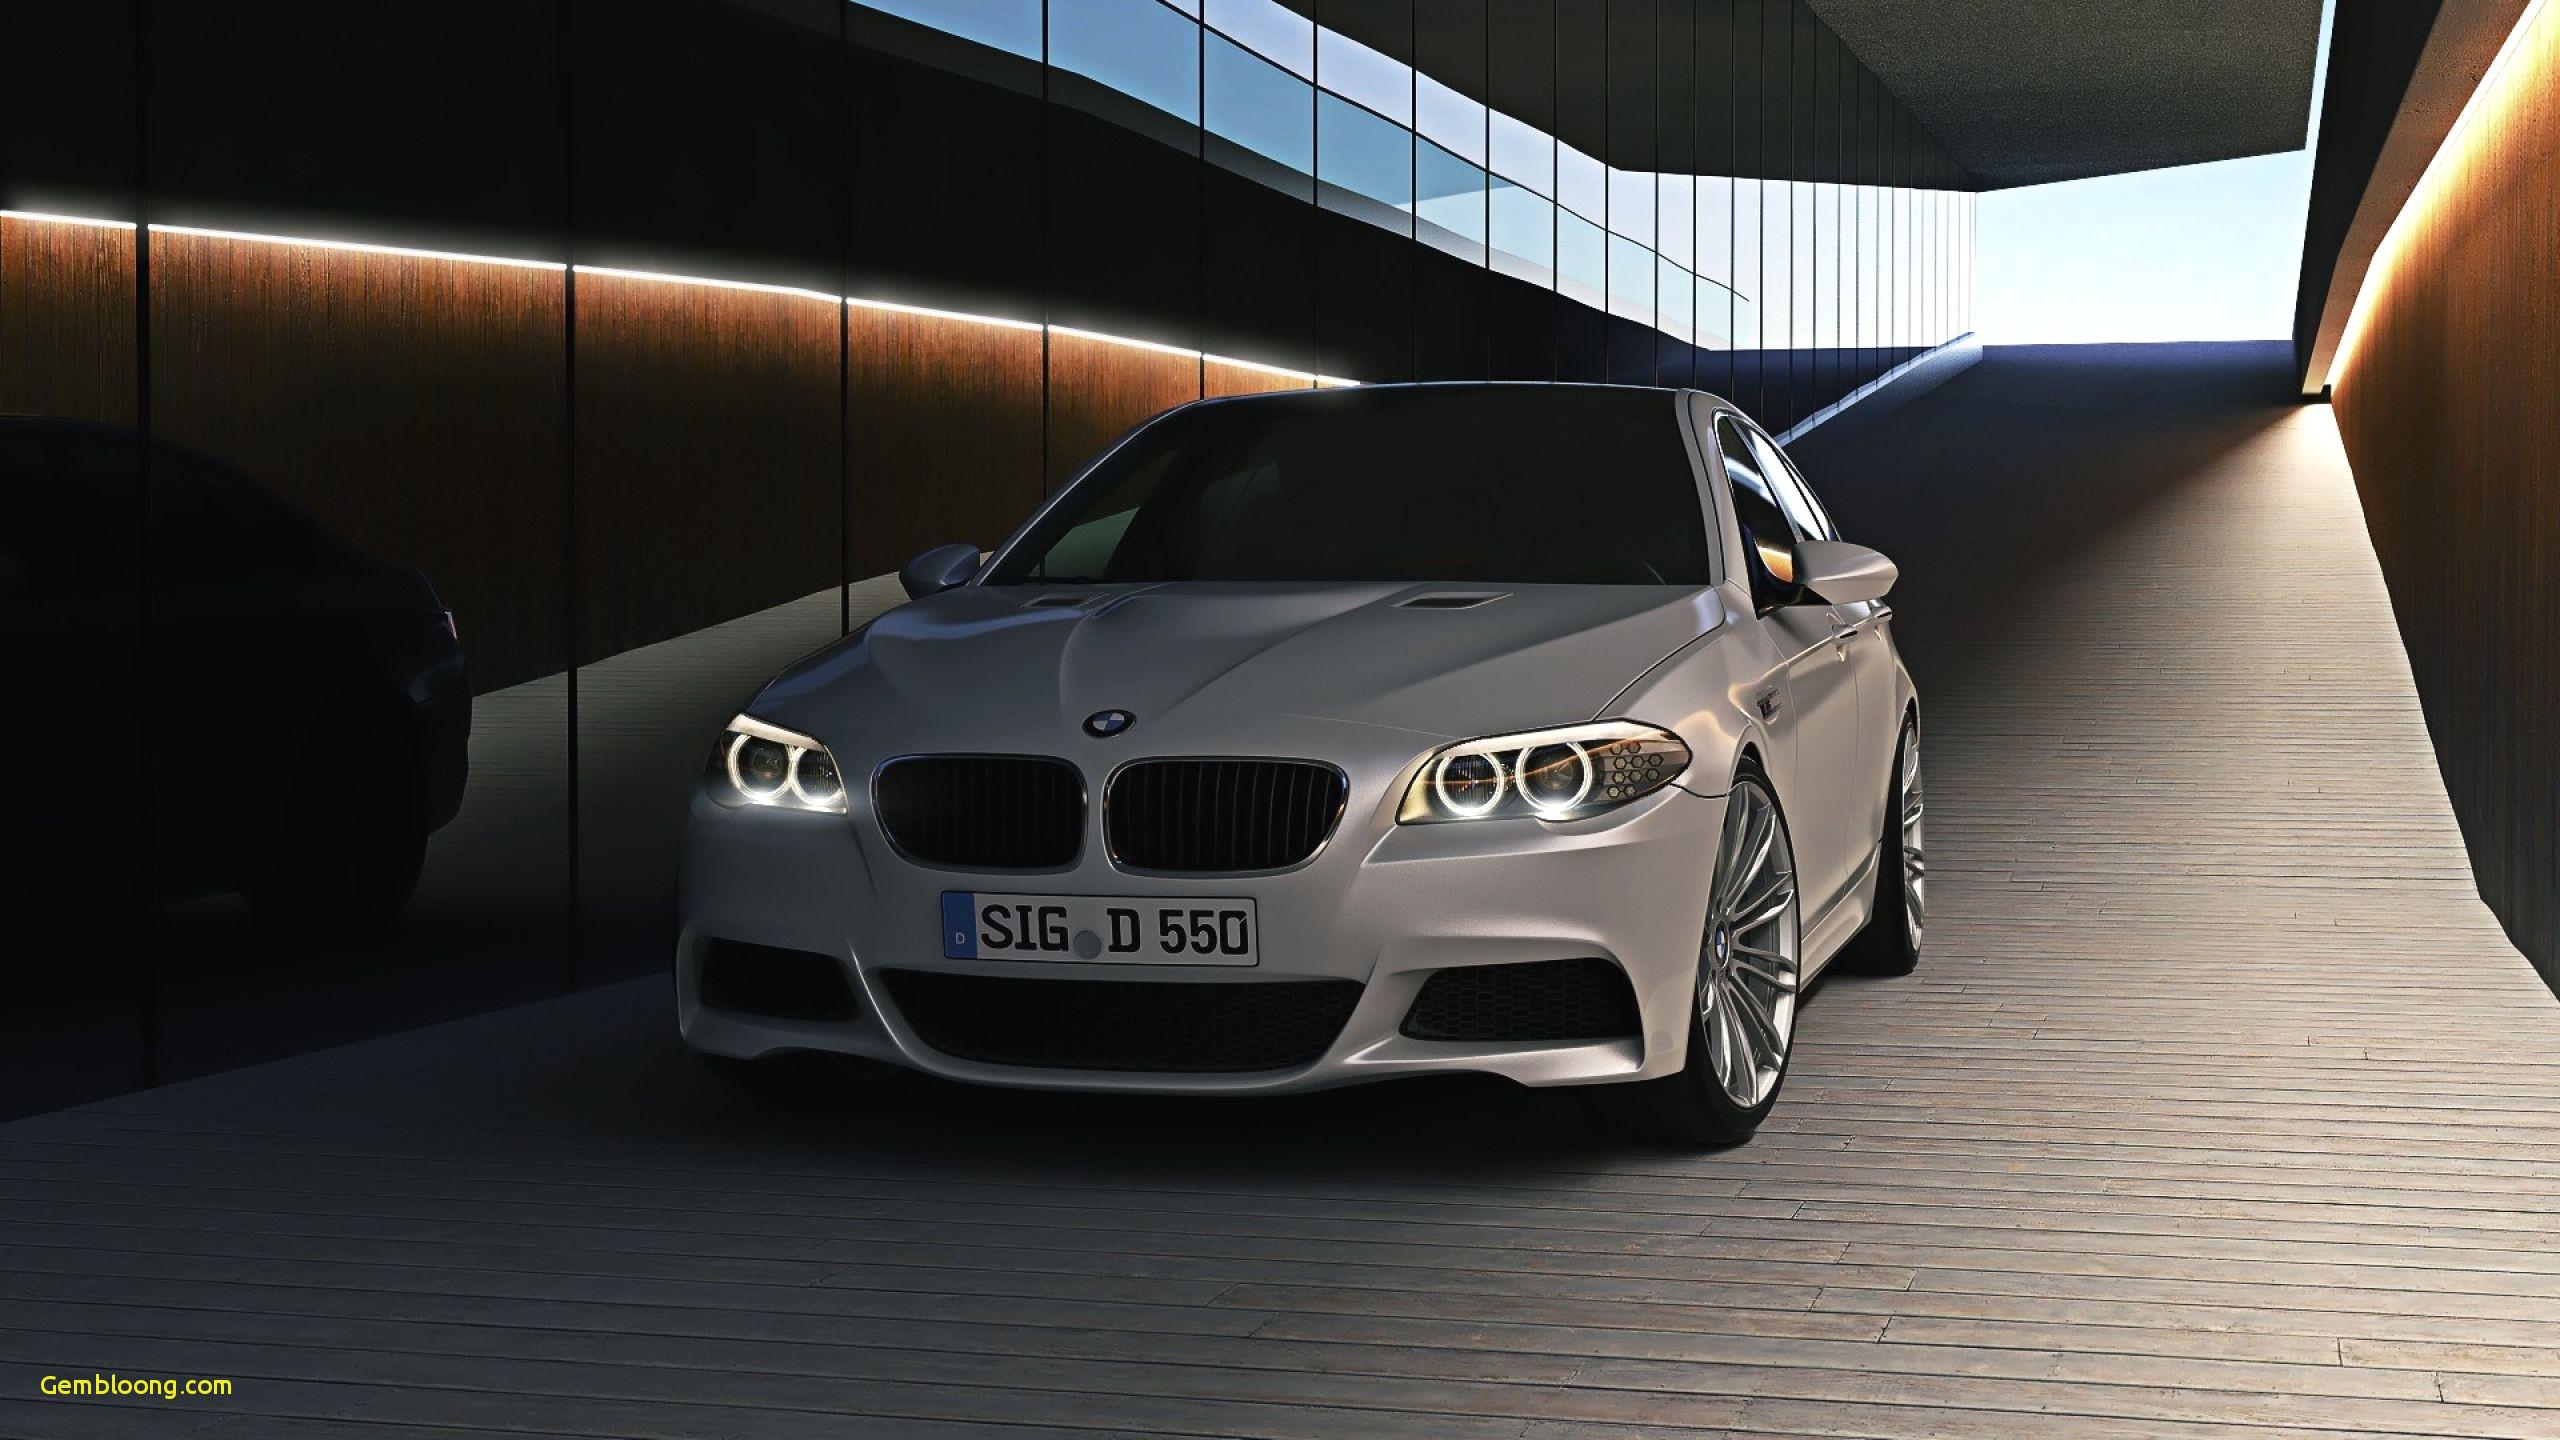 Hd Bmw Wallpaper for Phone Awesome Bmw 5 Series Wallpaper Get Free